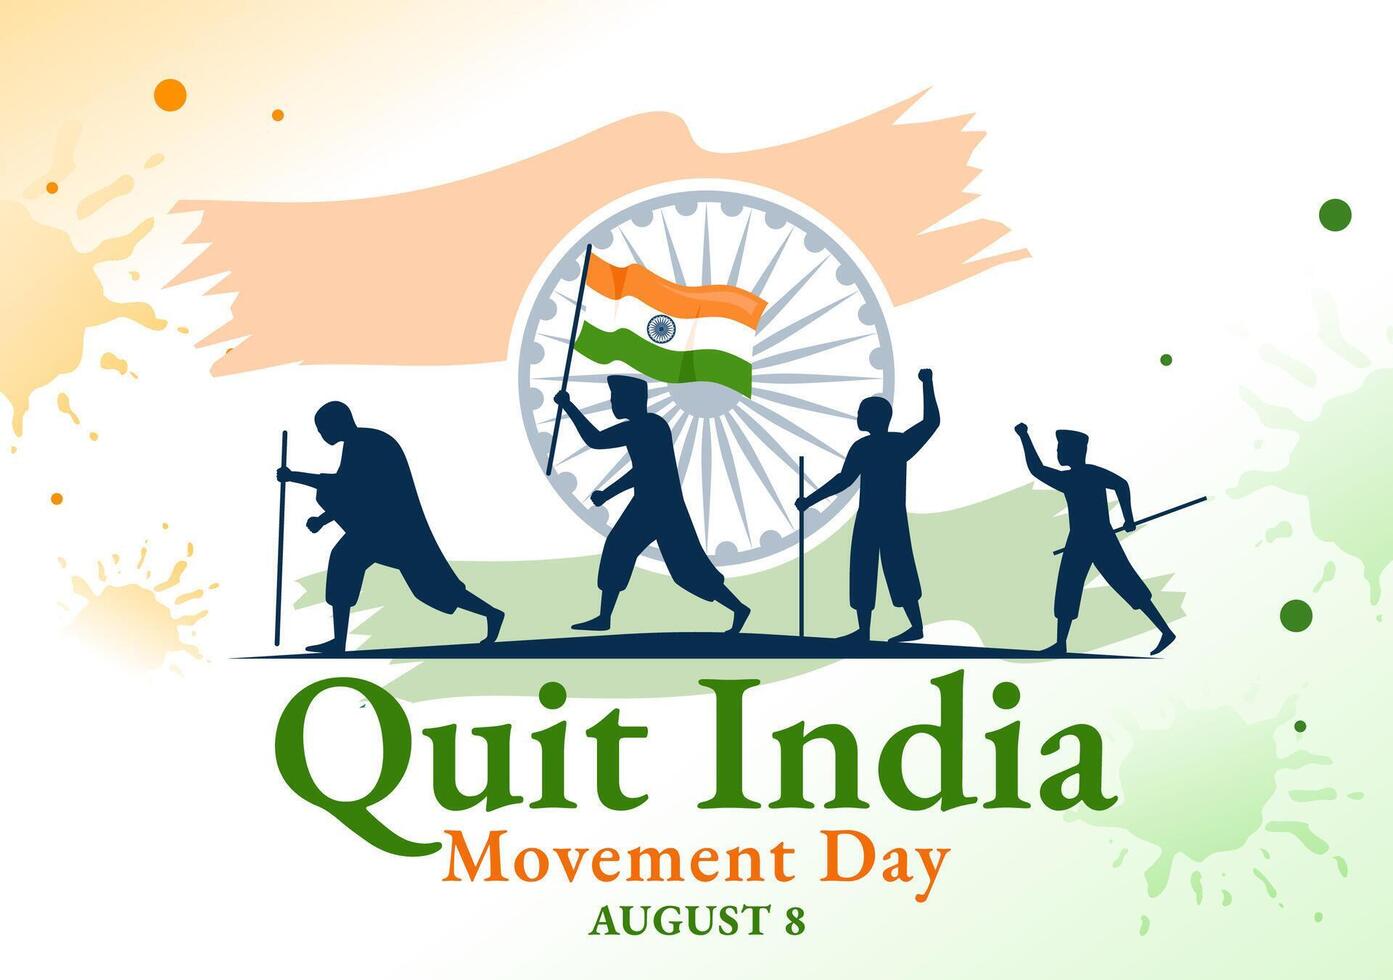 Quit India Movement Day Illustration on 8 August with Indian Flag and People Silhouette in Flat Cartoon Background Design vector